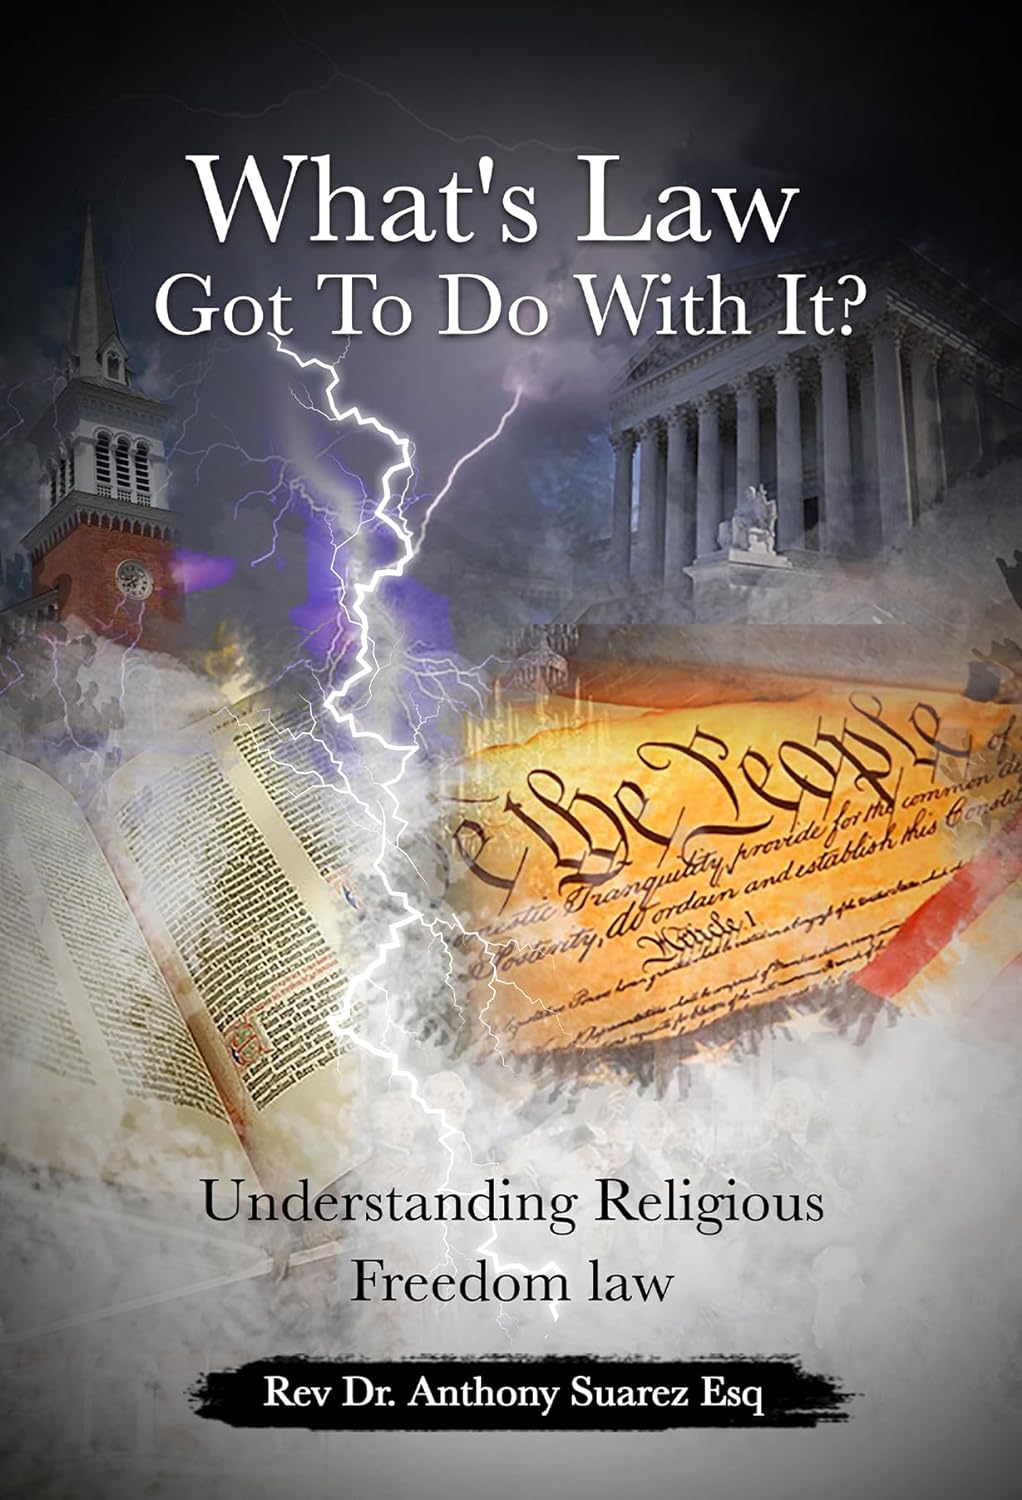 Rev Dr. Anthony Suarez Esq New Book About Religious Freedom Law - What’s Law Got To Do With It?